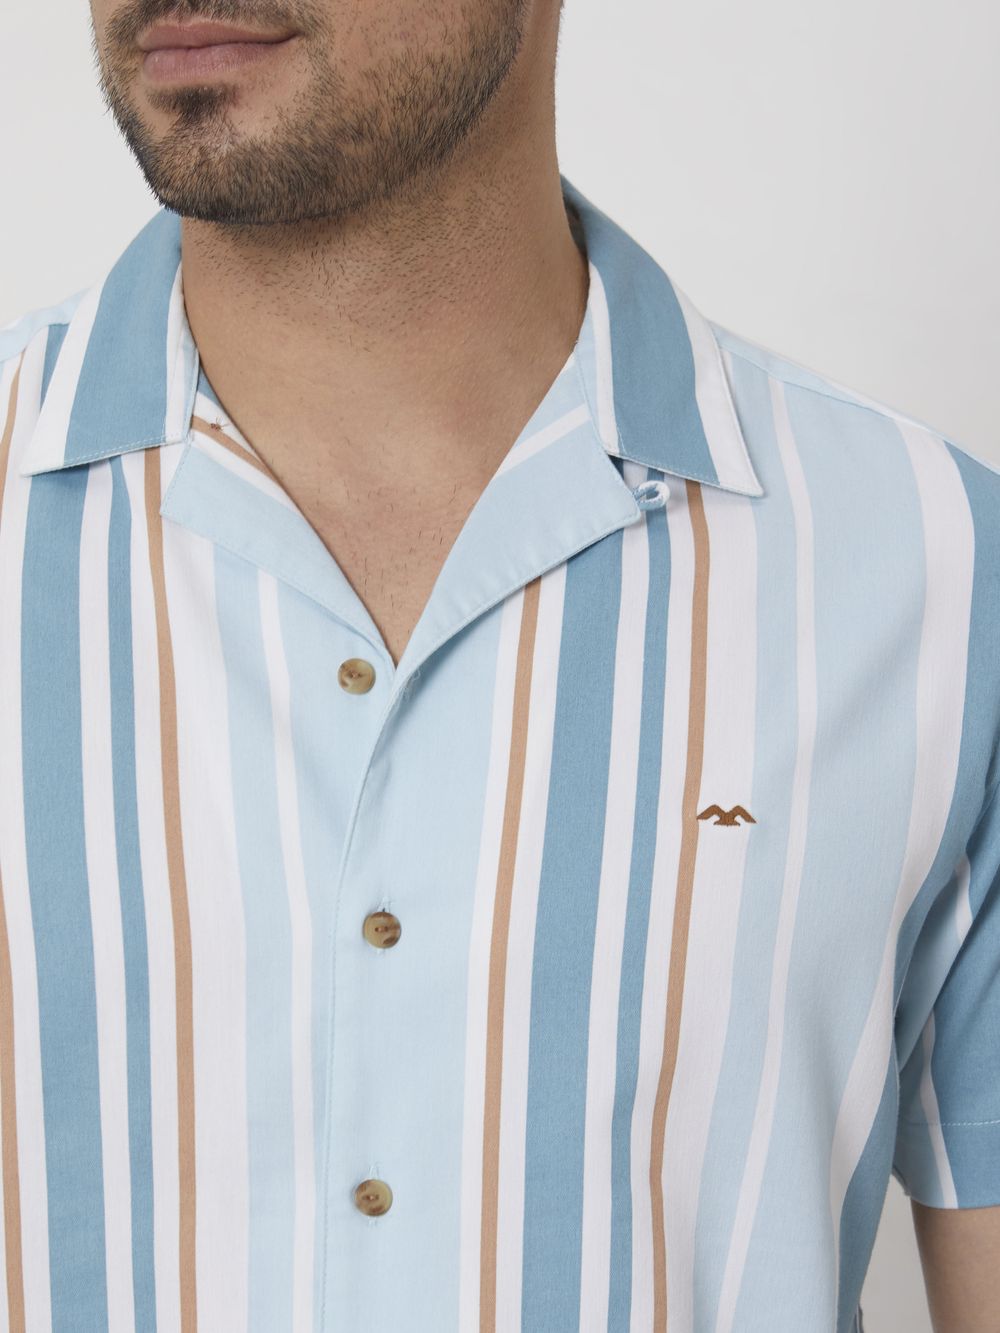 Teal Resort Stripe Relaxed Fit Casual Shirt